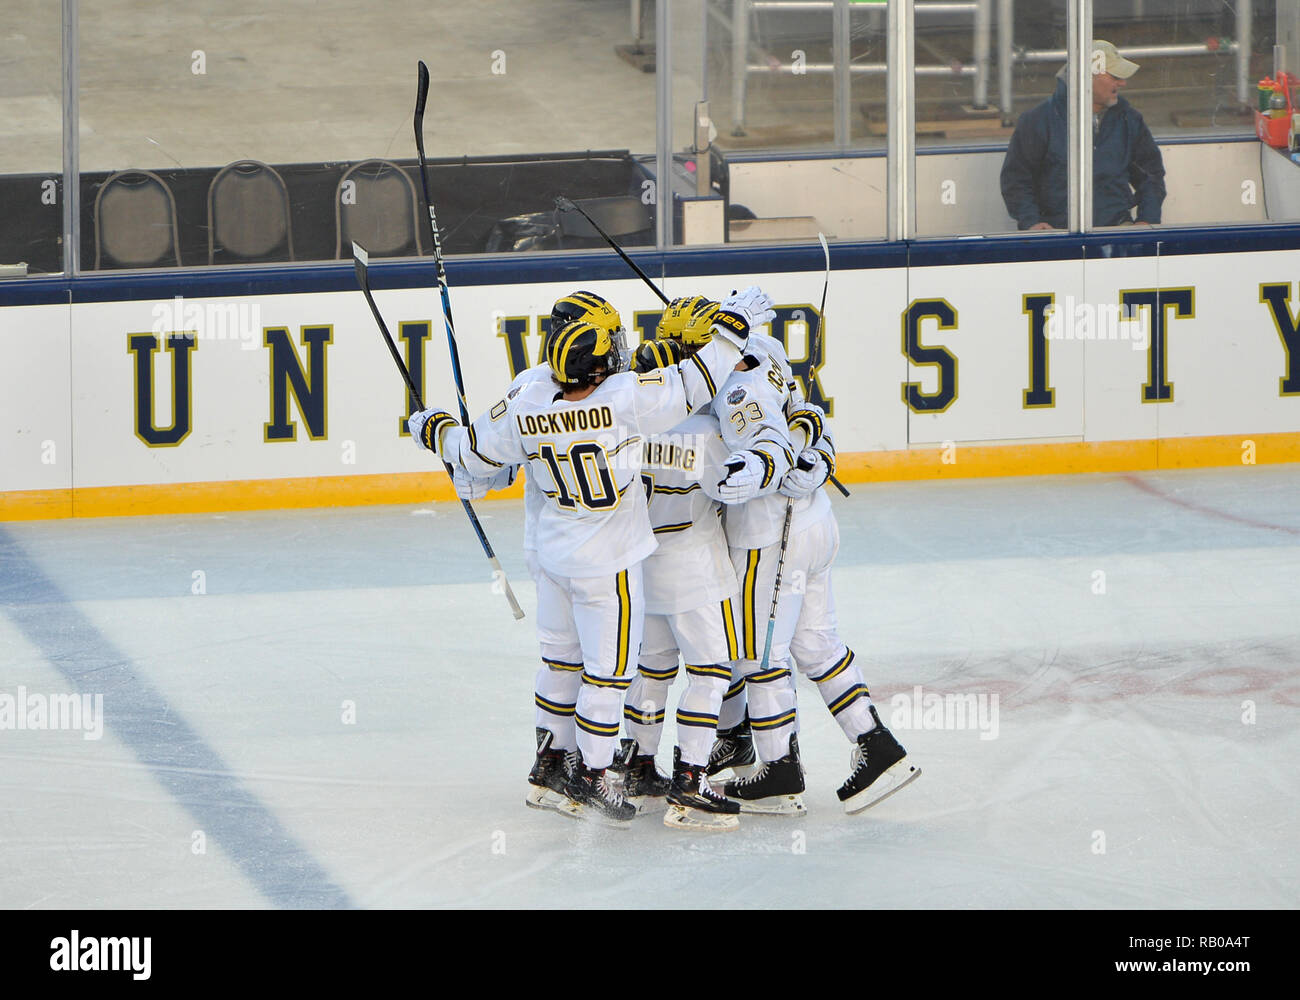 Indiana, USA USA. 05th Jan, 2019. Michigan Wolverines defenseman Joseph Cecconi (33) celebrates with his teams after scoring a goal during the 1st period Let's Take This Outside Meijer between the University of Michigan Wolverines and the University of Notre Dame Fighting Irish at Norte Dame Stadium in South Bend, IN. Michigan wins against Notre Dame, 4-2. Patrick Green/CSM/Alamy Live News Stock Photo